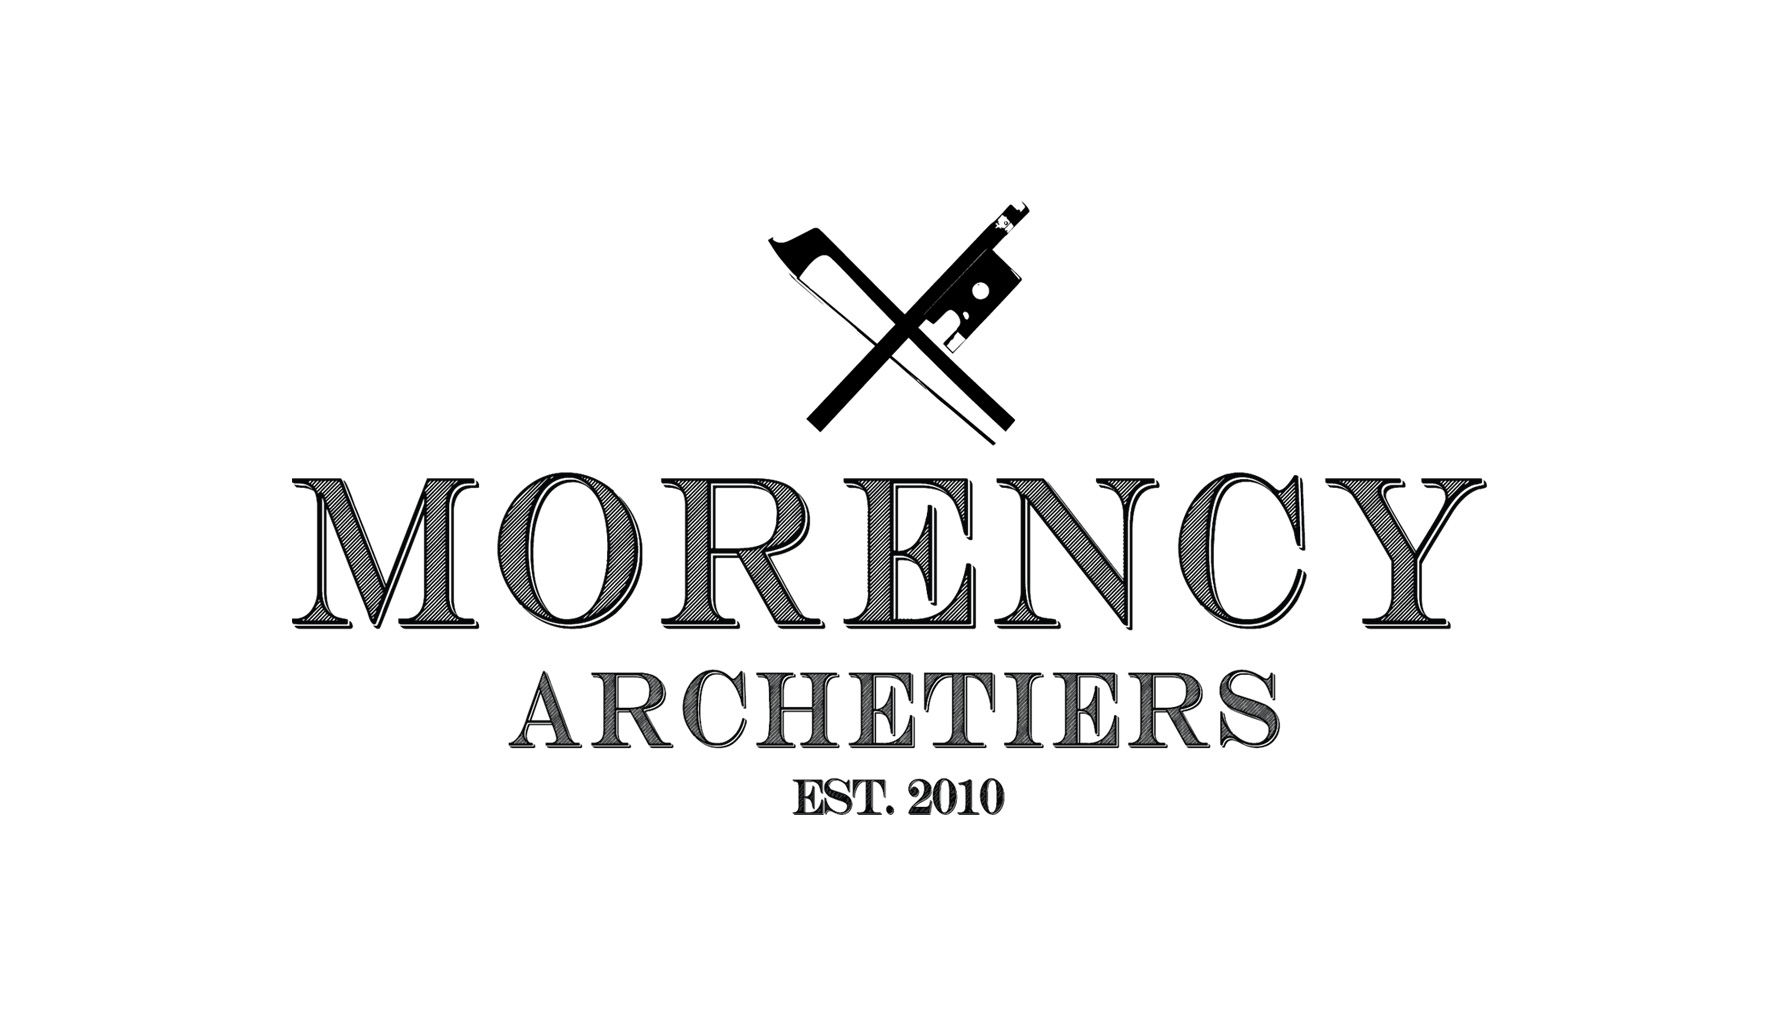 Atelier Morency